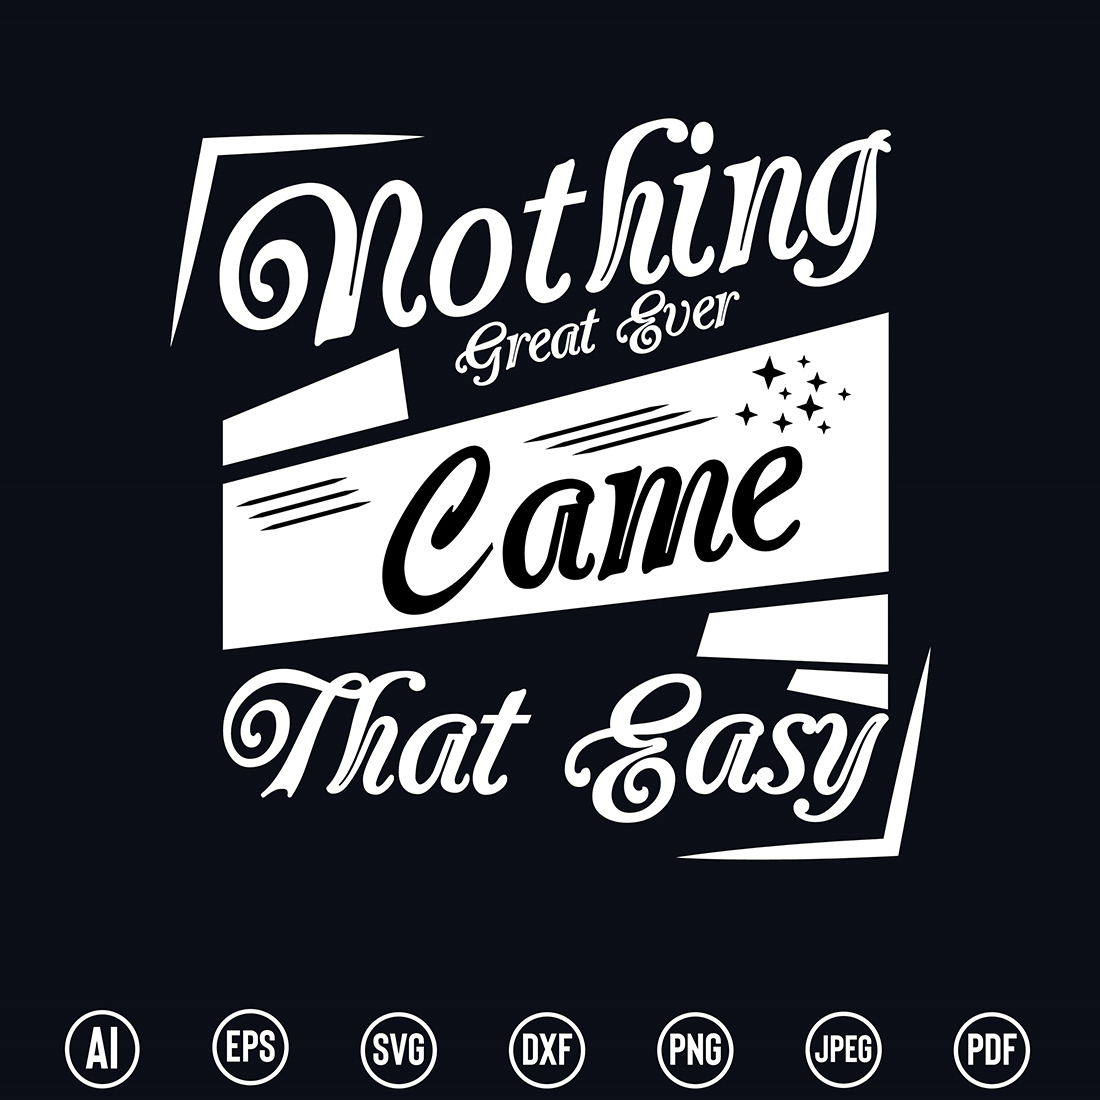 Modern Typography T-Shirt design with “Nothing great ever came that easy” quote for t-shirt, posters, stickers, mug prints, banners, gift cards, labels etc preview image.